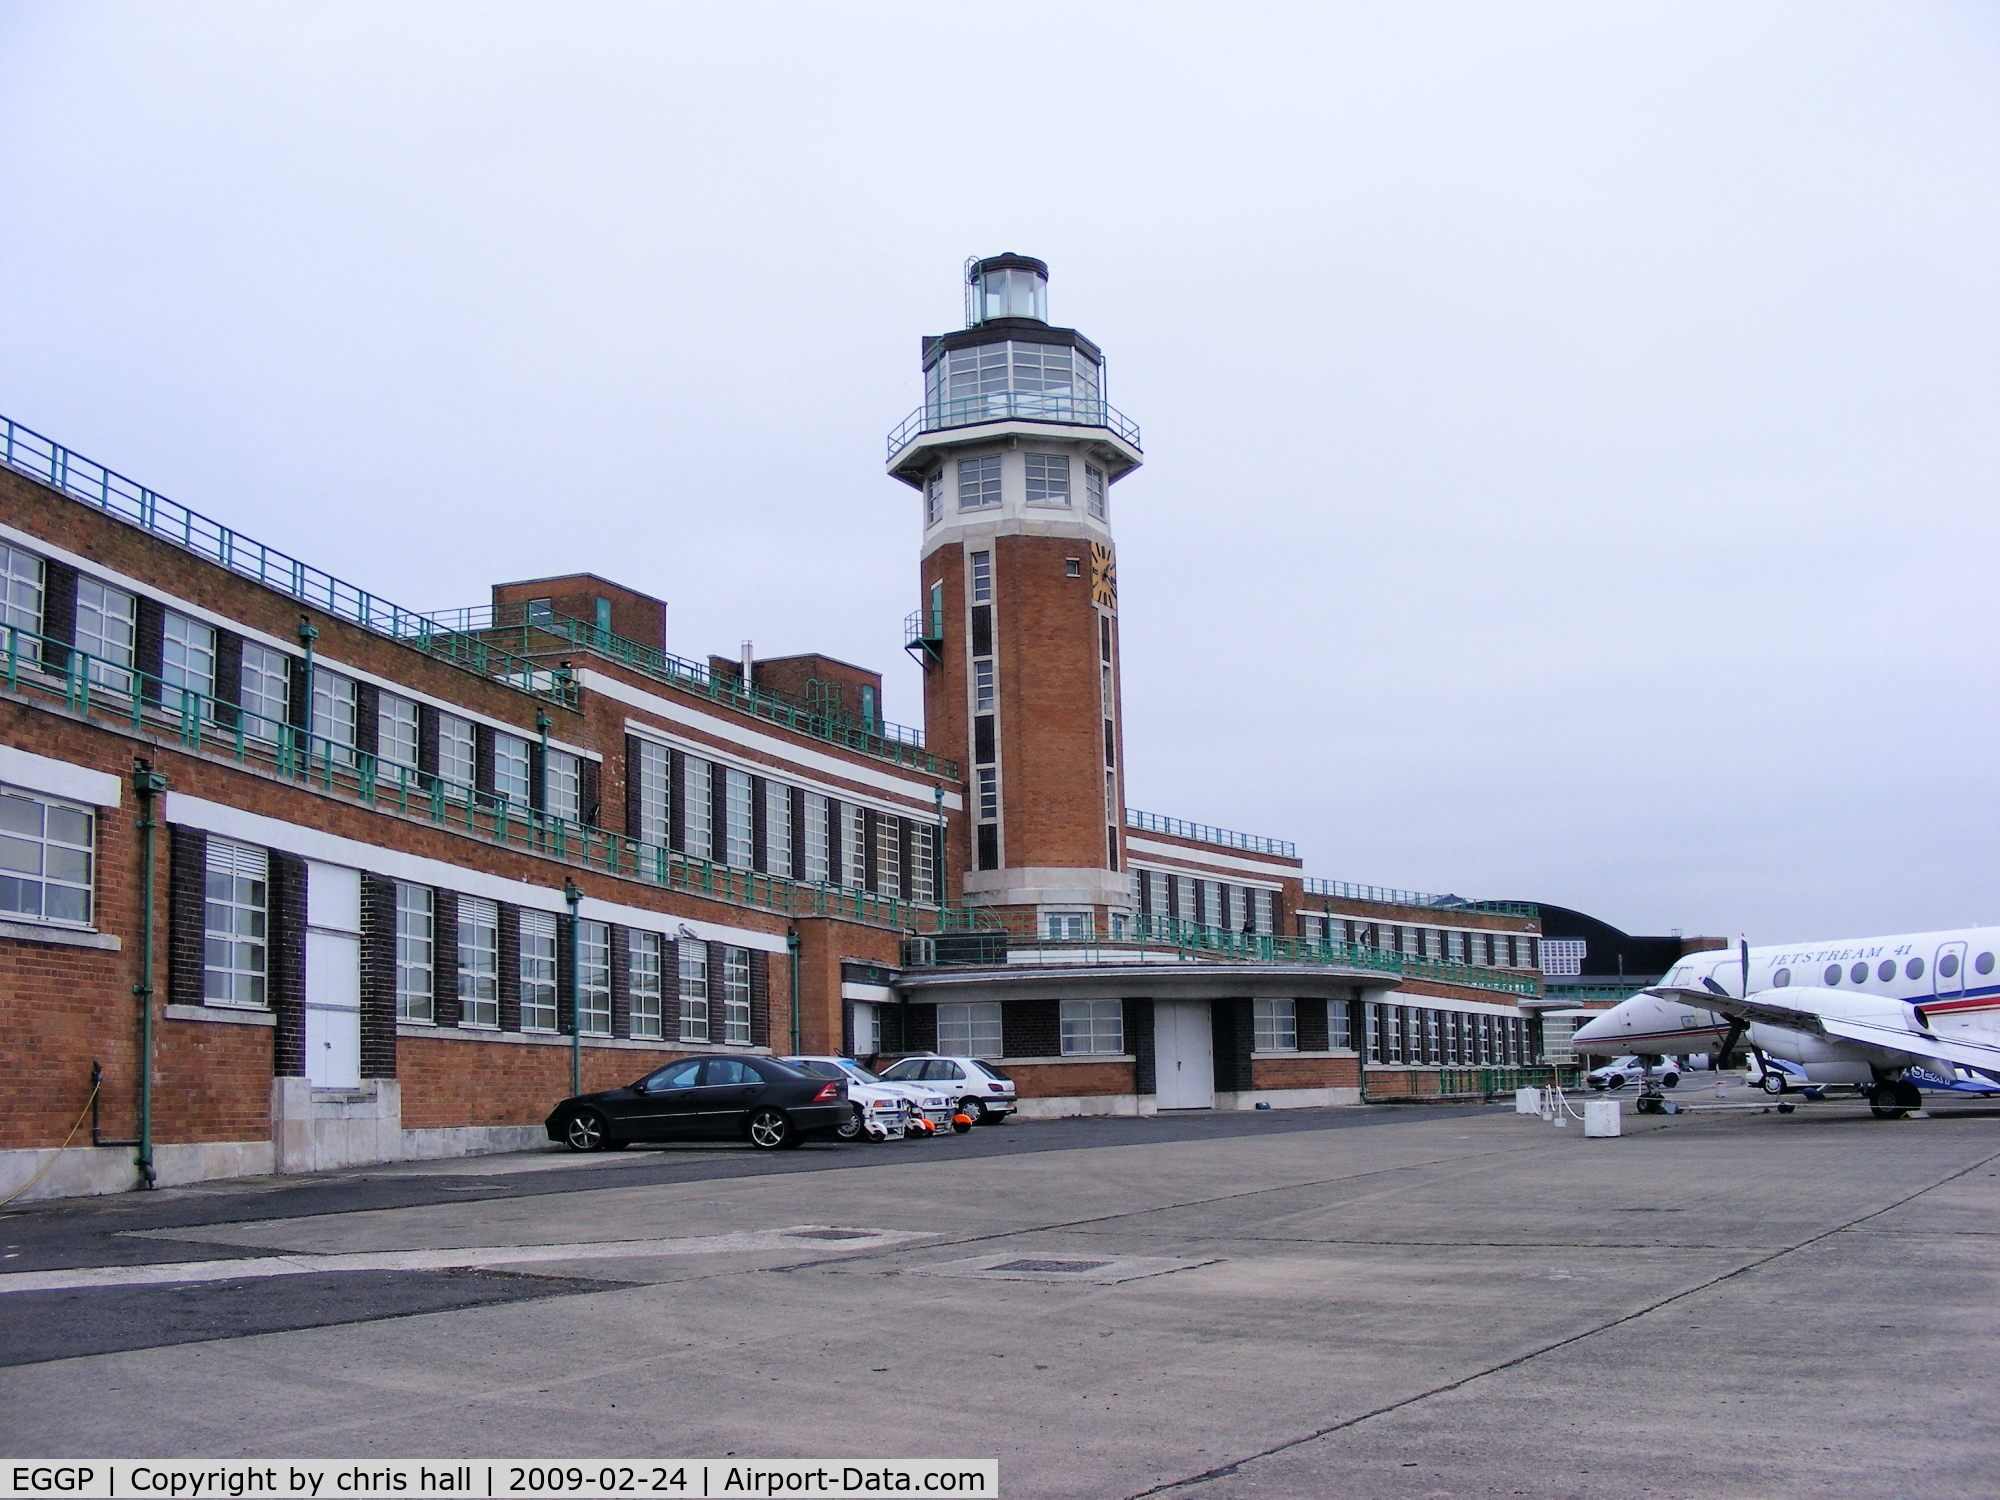 Liverpool John Lennon Airport, Liverpool, England United Kingdom (EGGP) - The old terminal building at Liverpool Speke Airport, now a Marriott Hotel